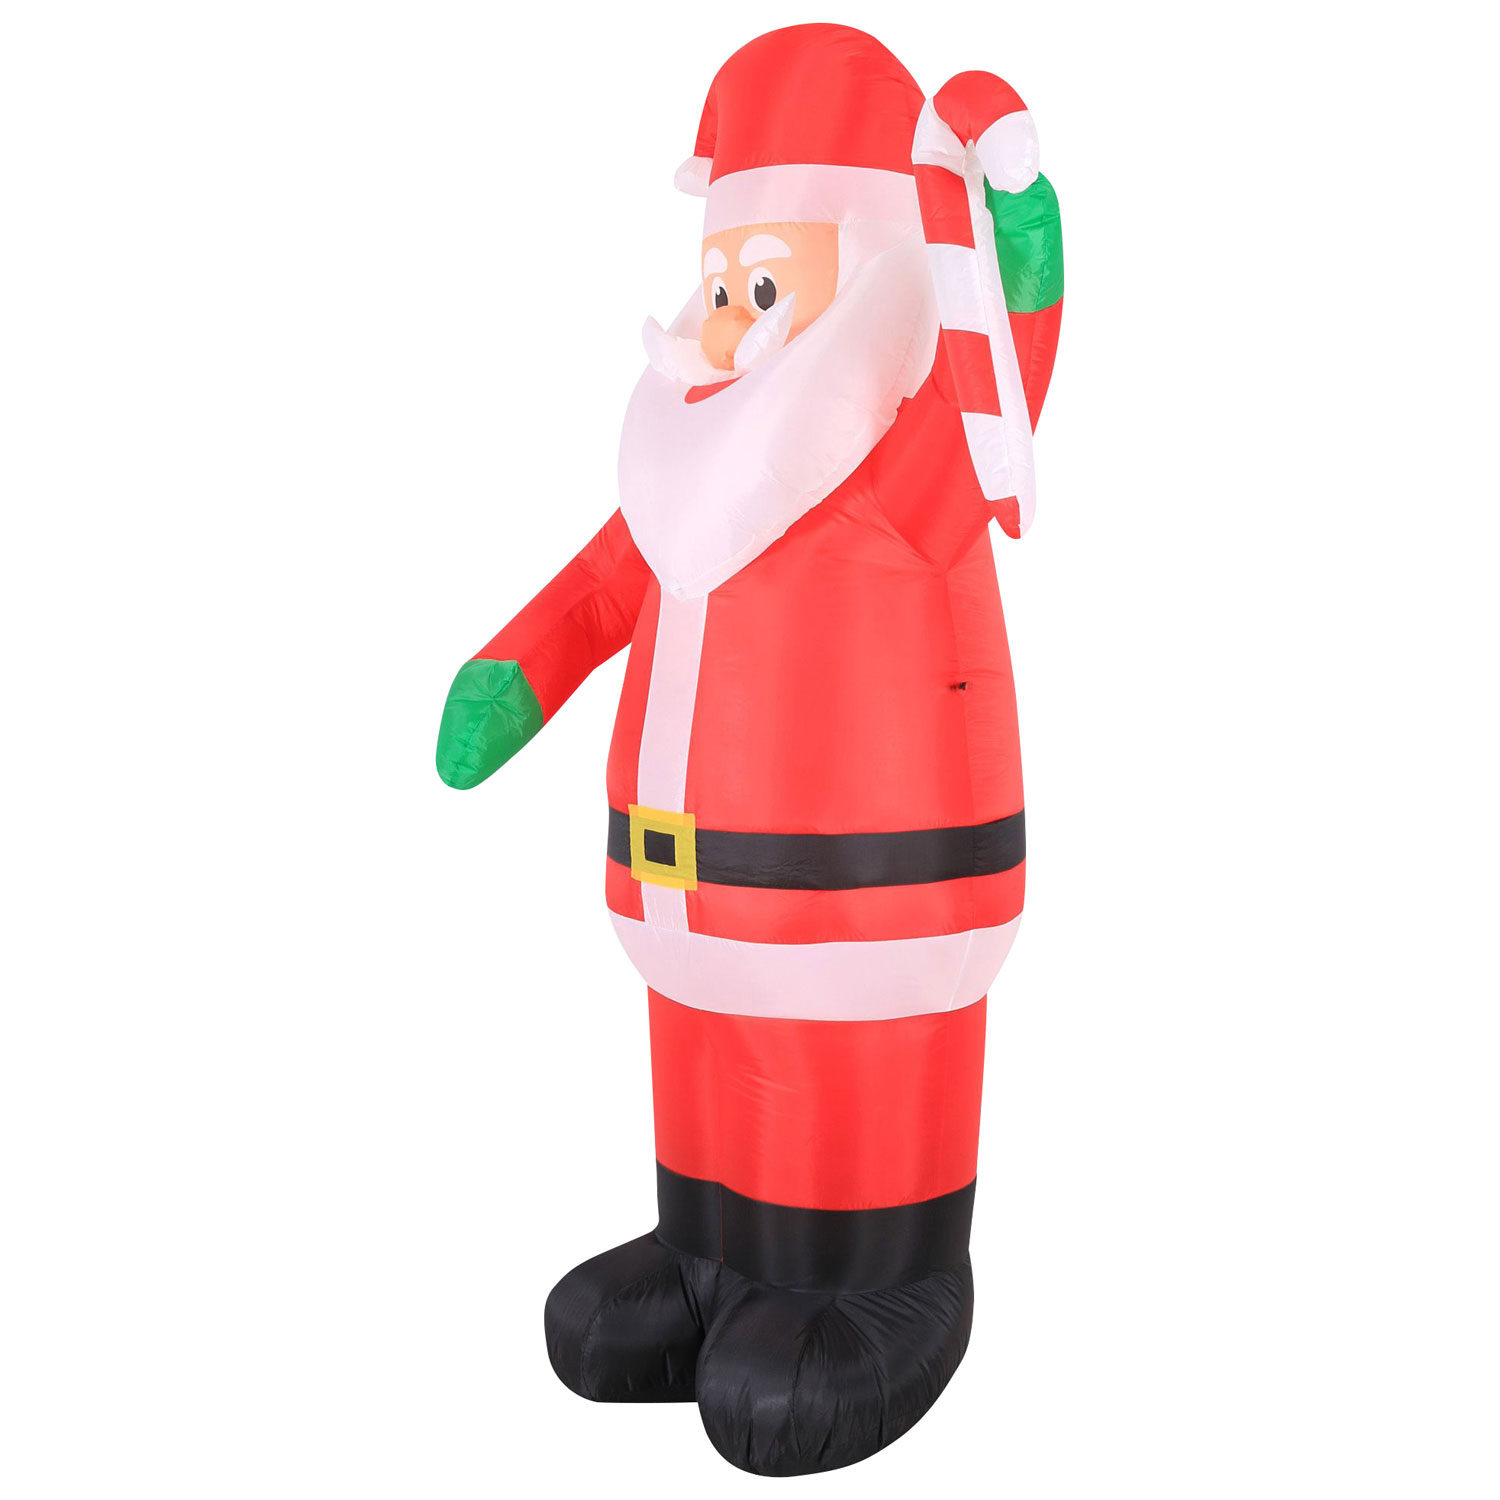 Occasions Christmas 7 Ft. Inflatable Santa with Candy Cane